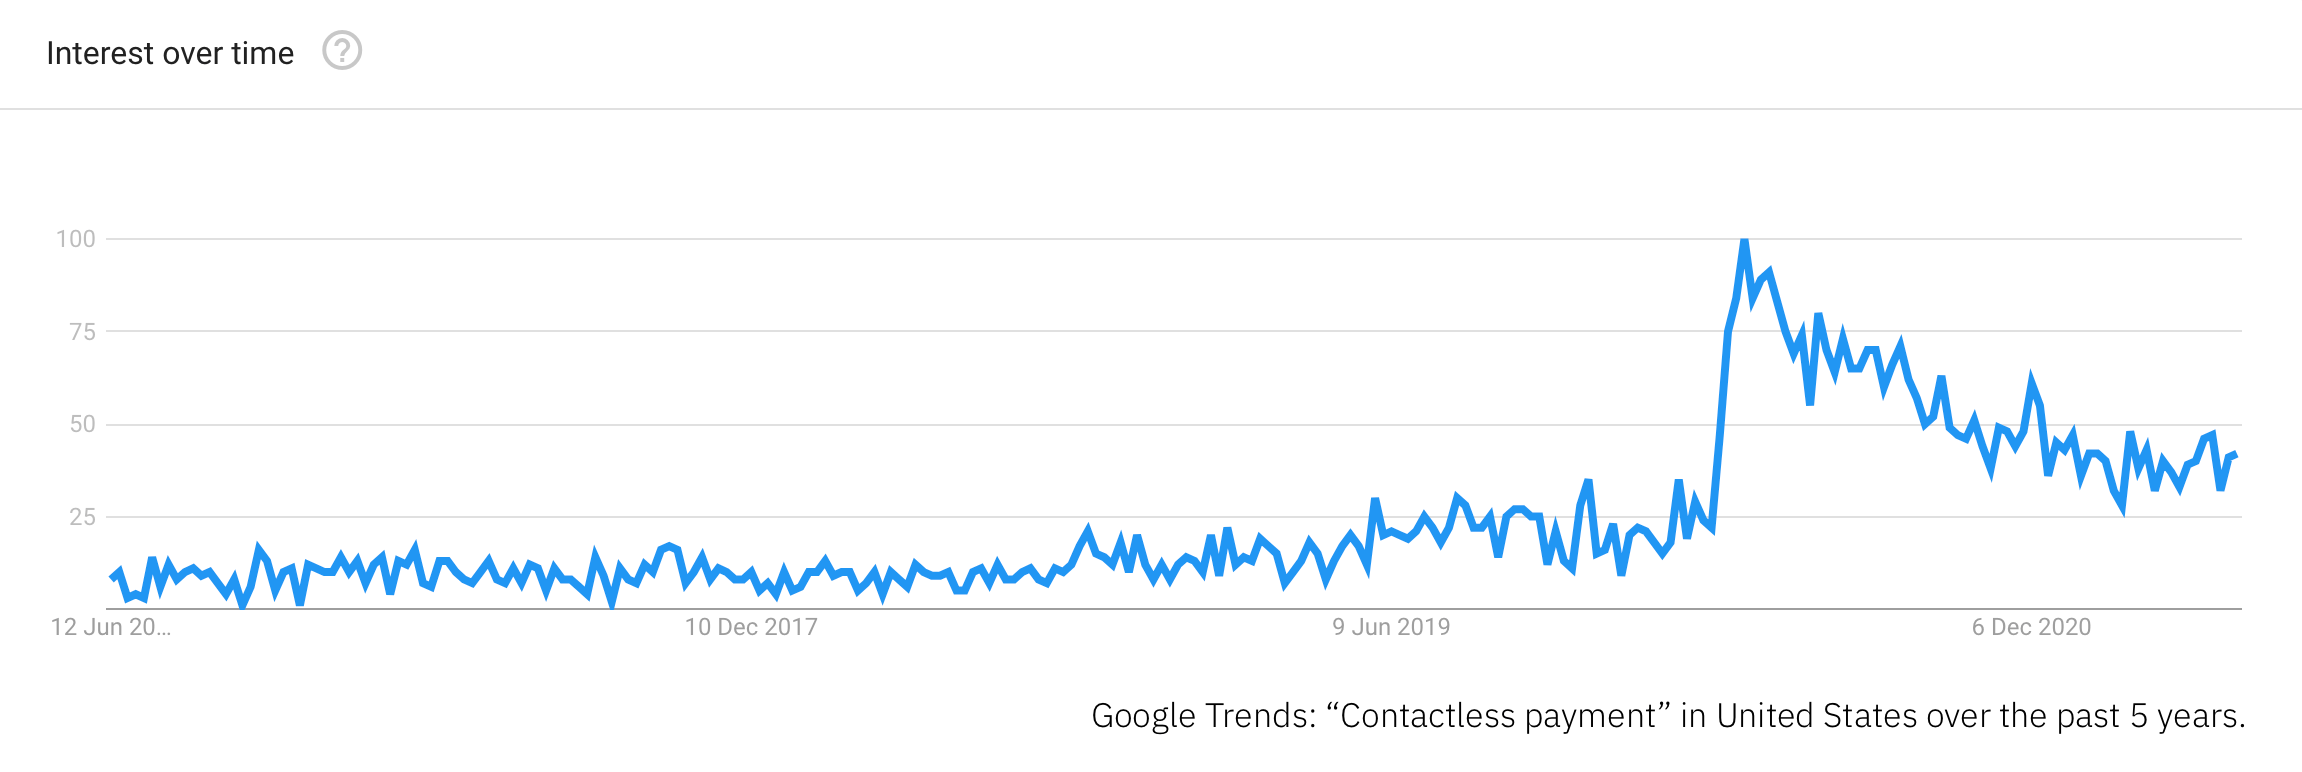 Google Trends for "contactless payments" shows a significant increase in early 2020.